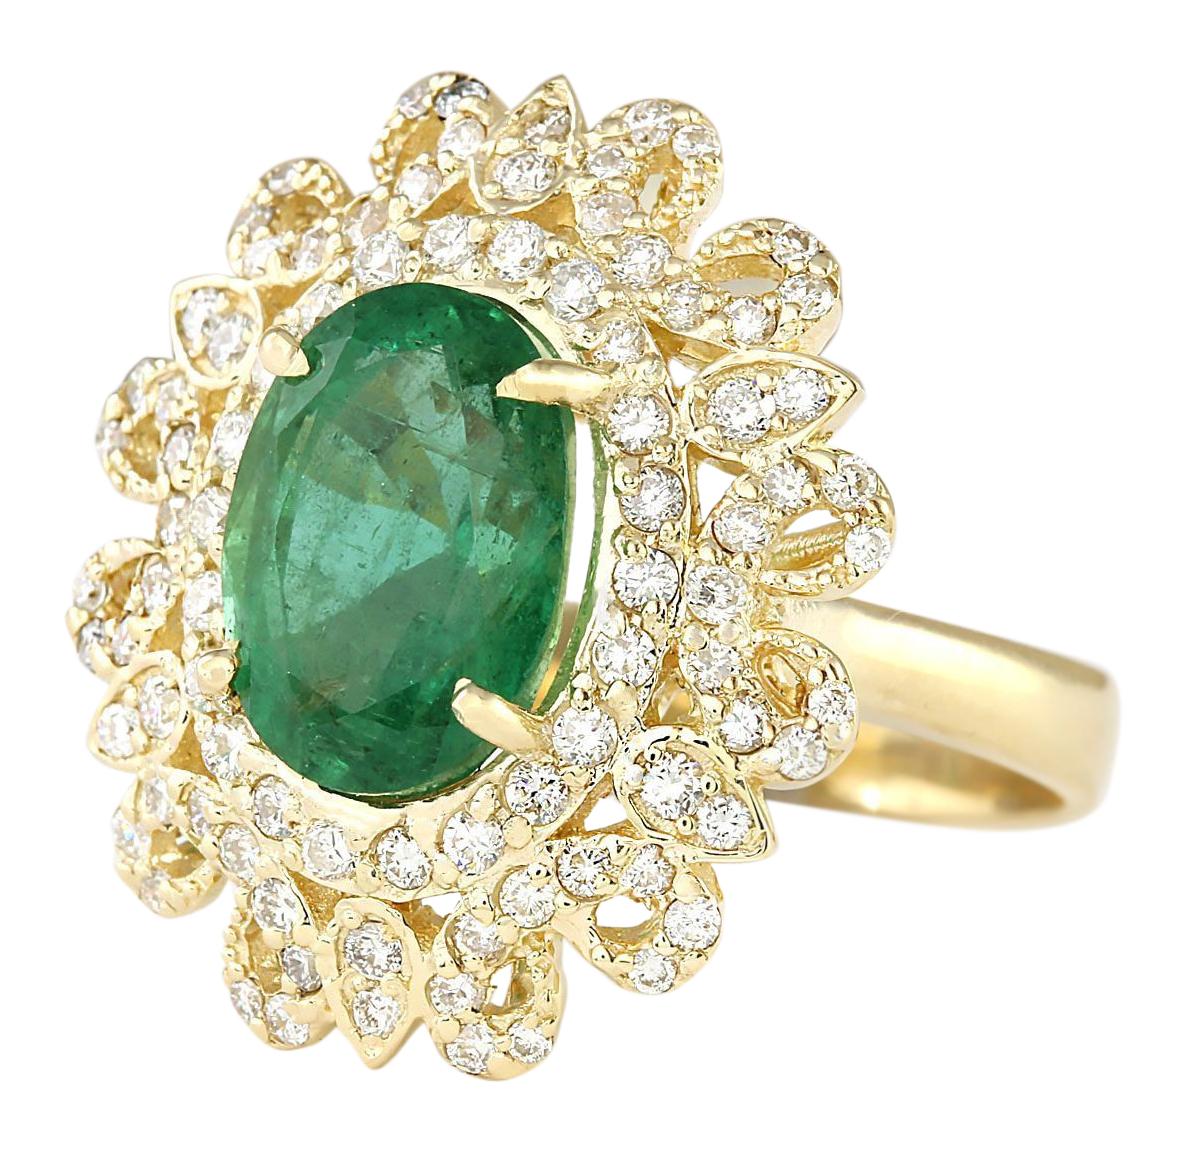 Stamped: 14K Yellow Gold
Total Ring Weight: 7.8 Grams
Total Natural Emerald Weight is 4.16 Carat (Measures: 11.00x9.00 mm)
Color: Green
Total Natural Diamond Weight is 1.00 Carat
Color: F-G, Clarity: VS2-SI1
Face Measures: 22.50x19.95 mm
Sku: